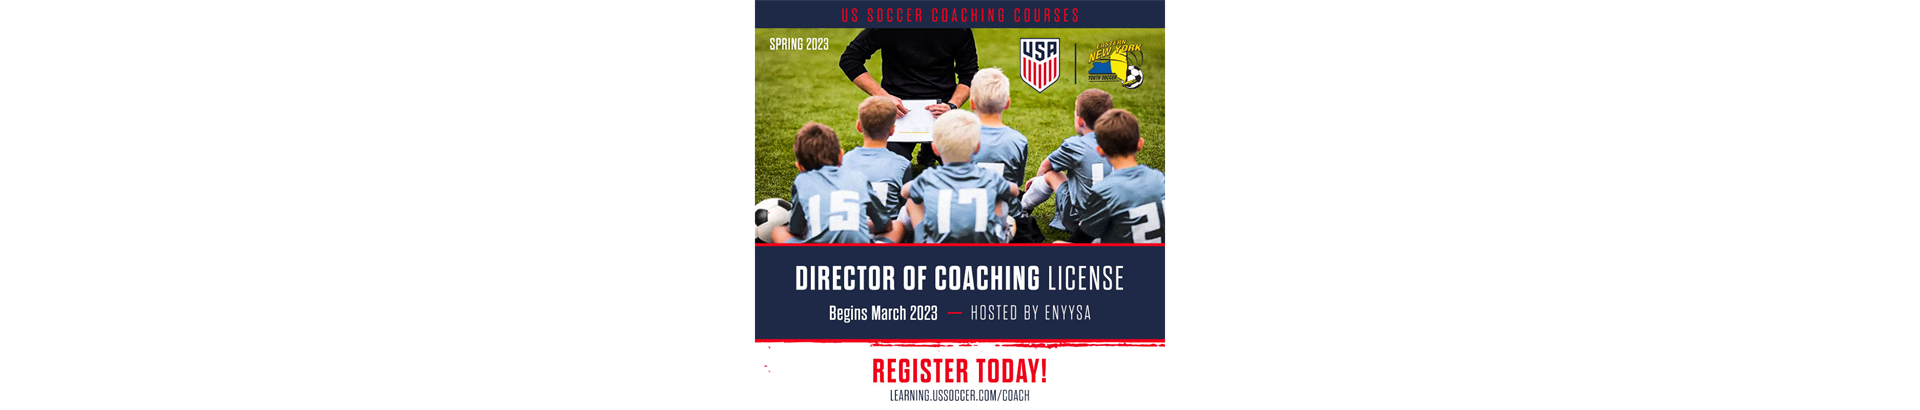 Director of Coaching License 